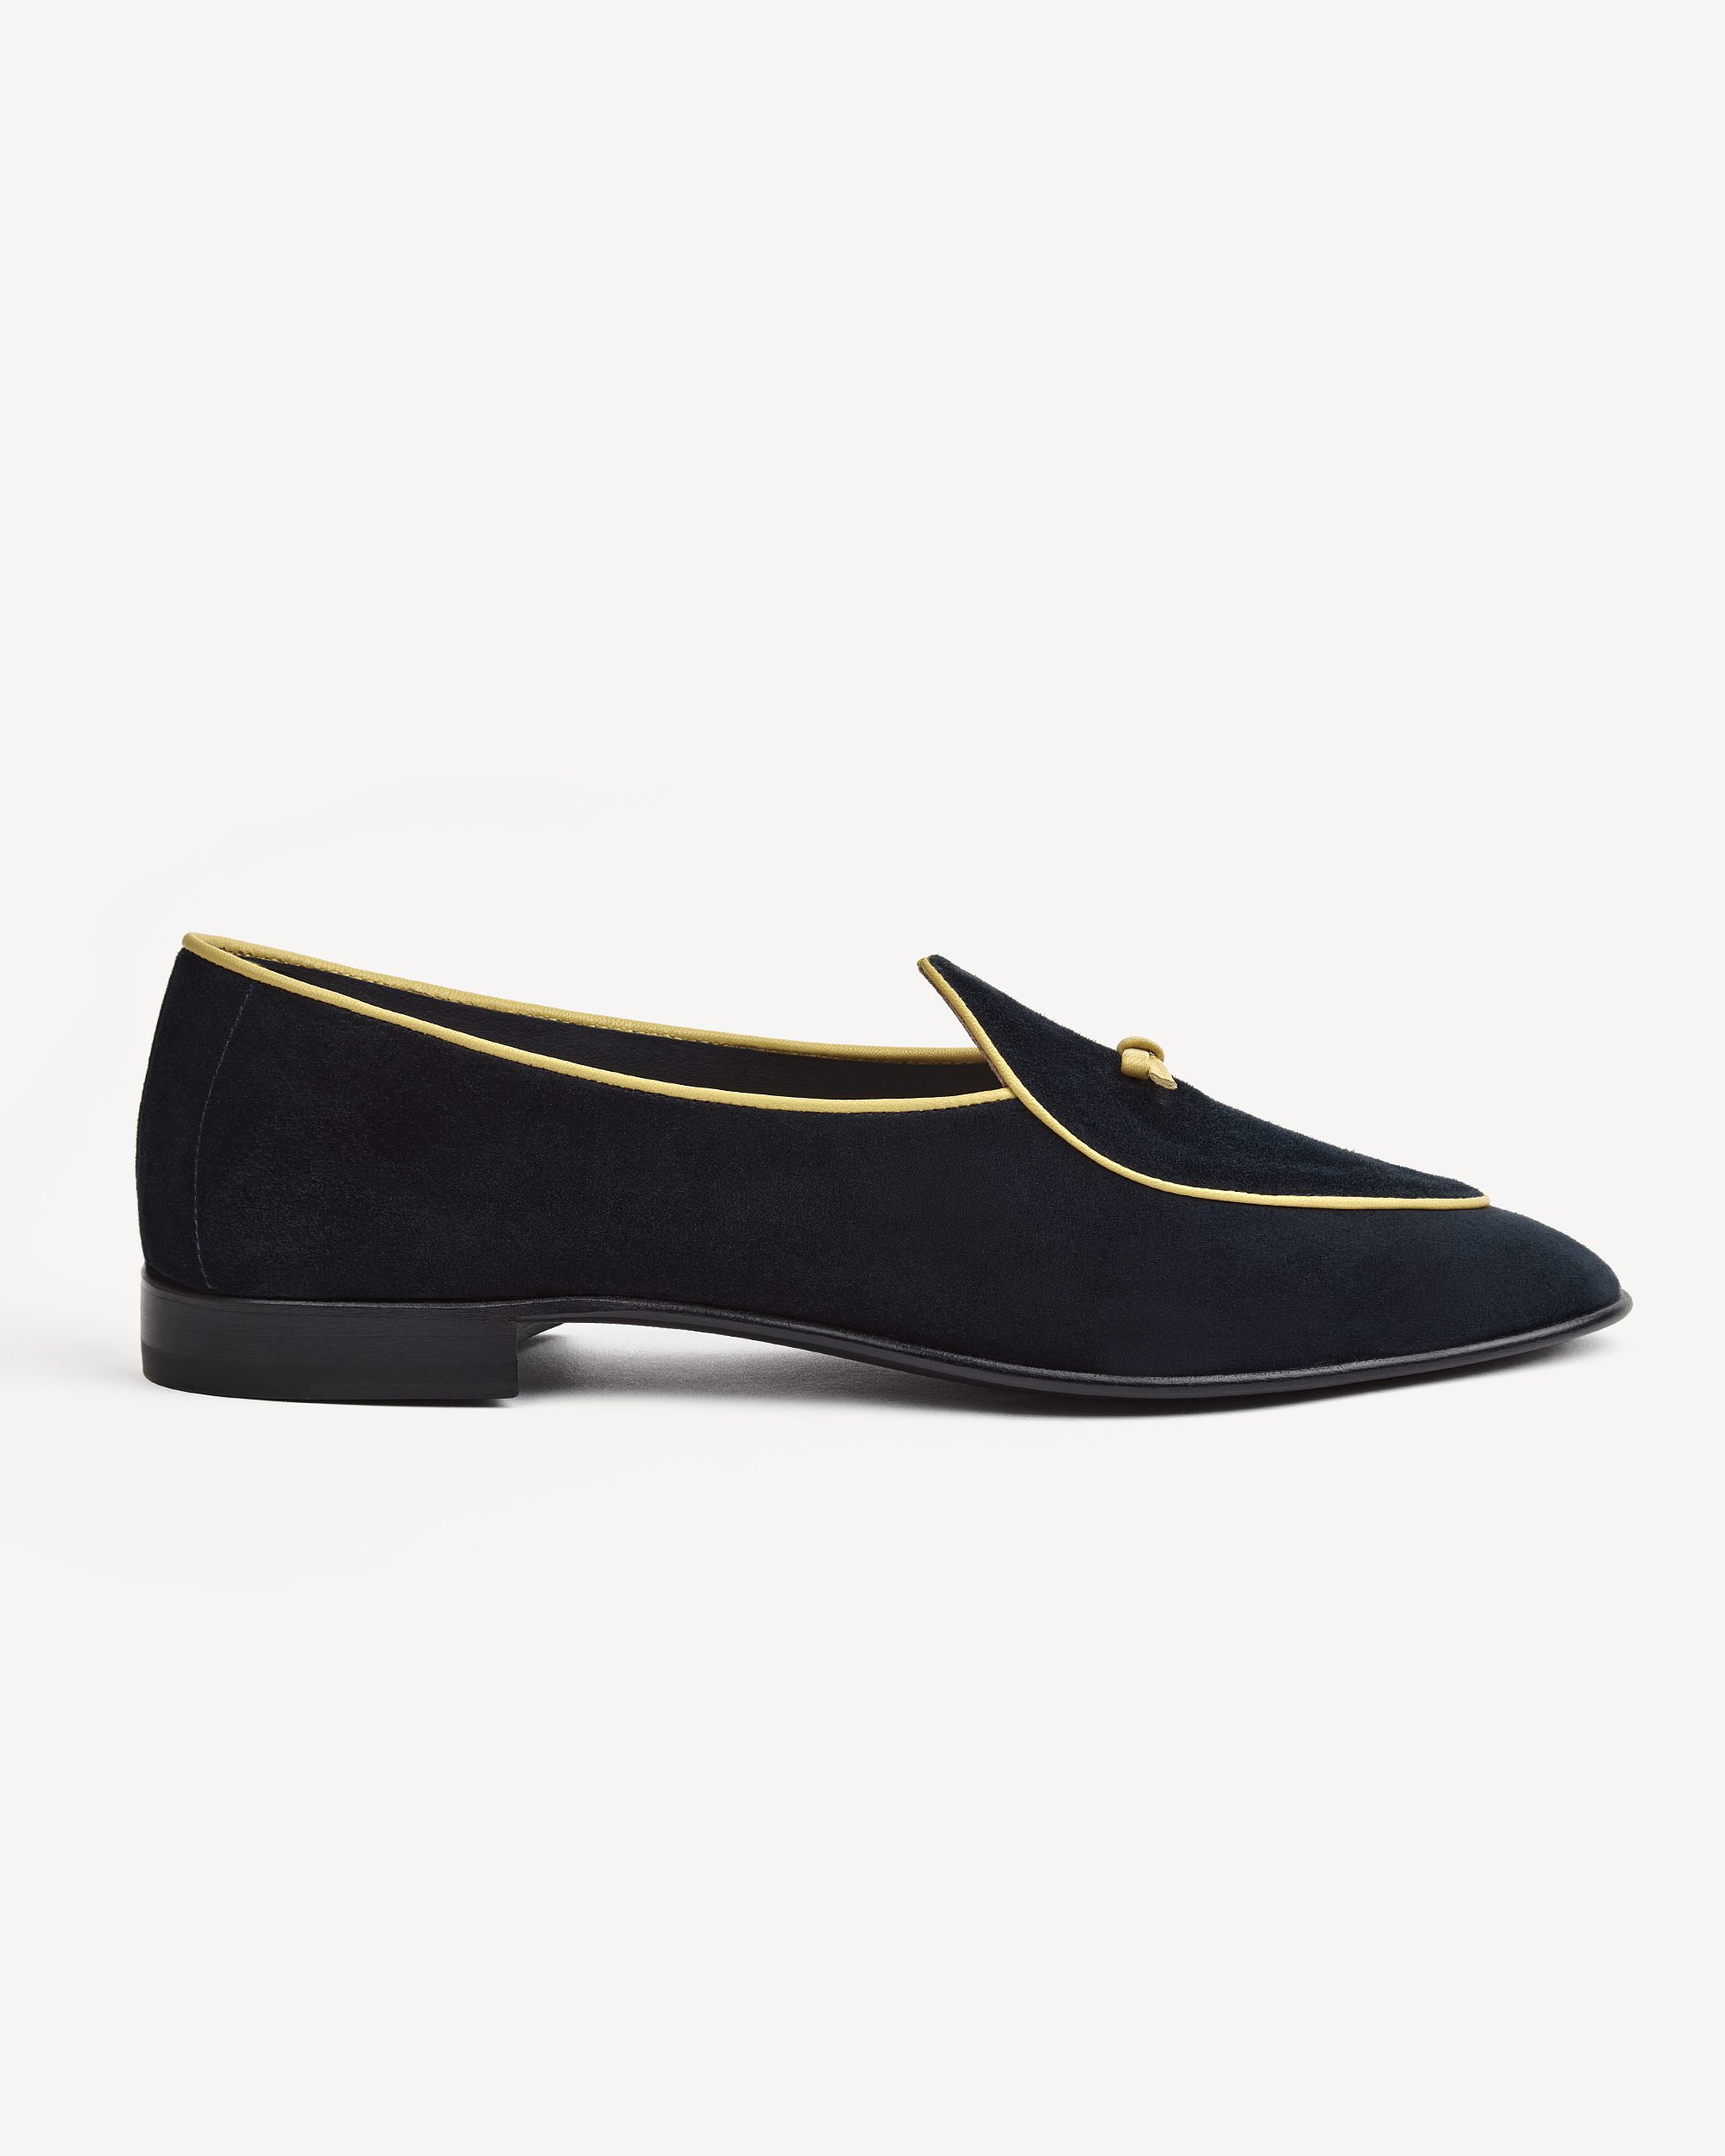 Unlined Belgian Suede Loafer - Black with Yellow Pipe | Viola Milano